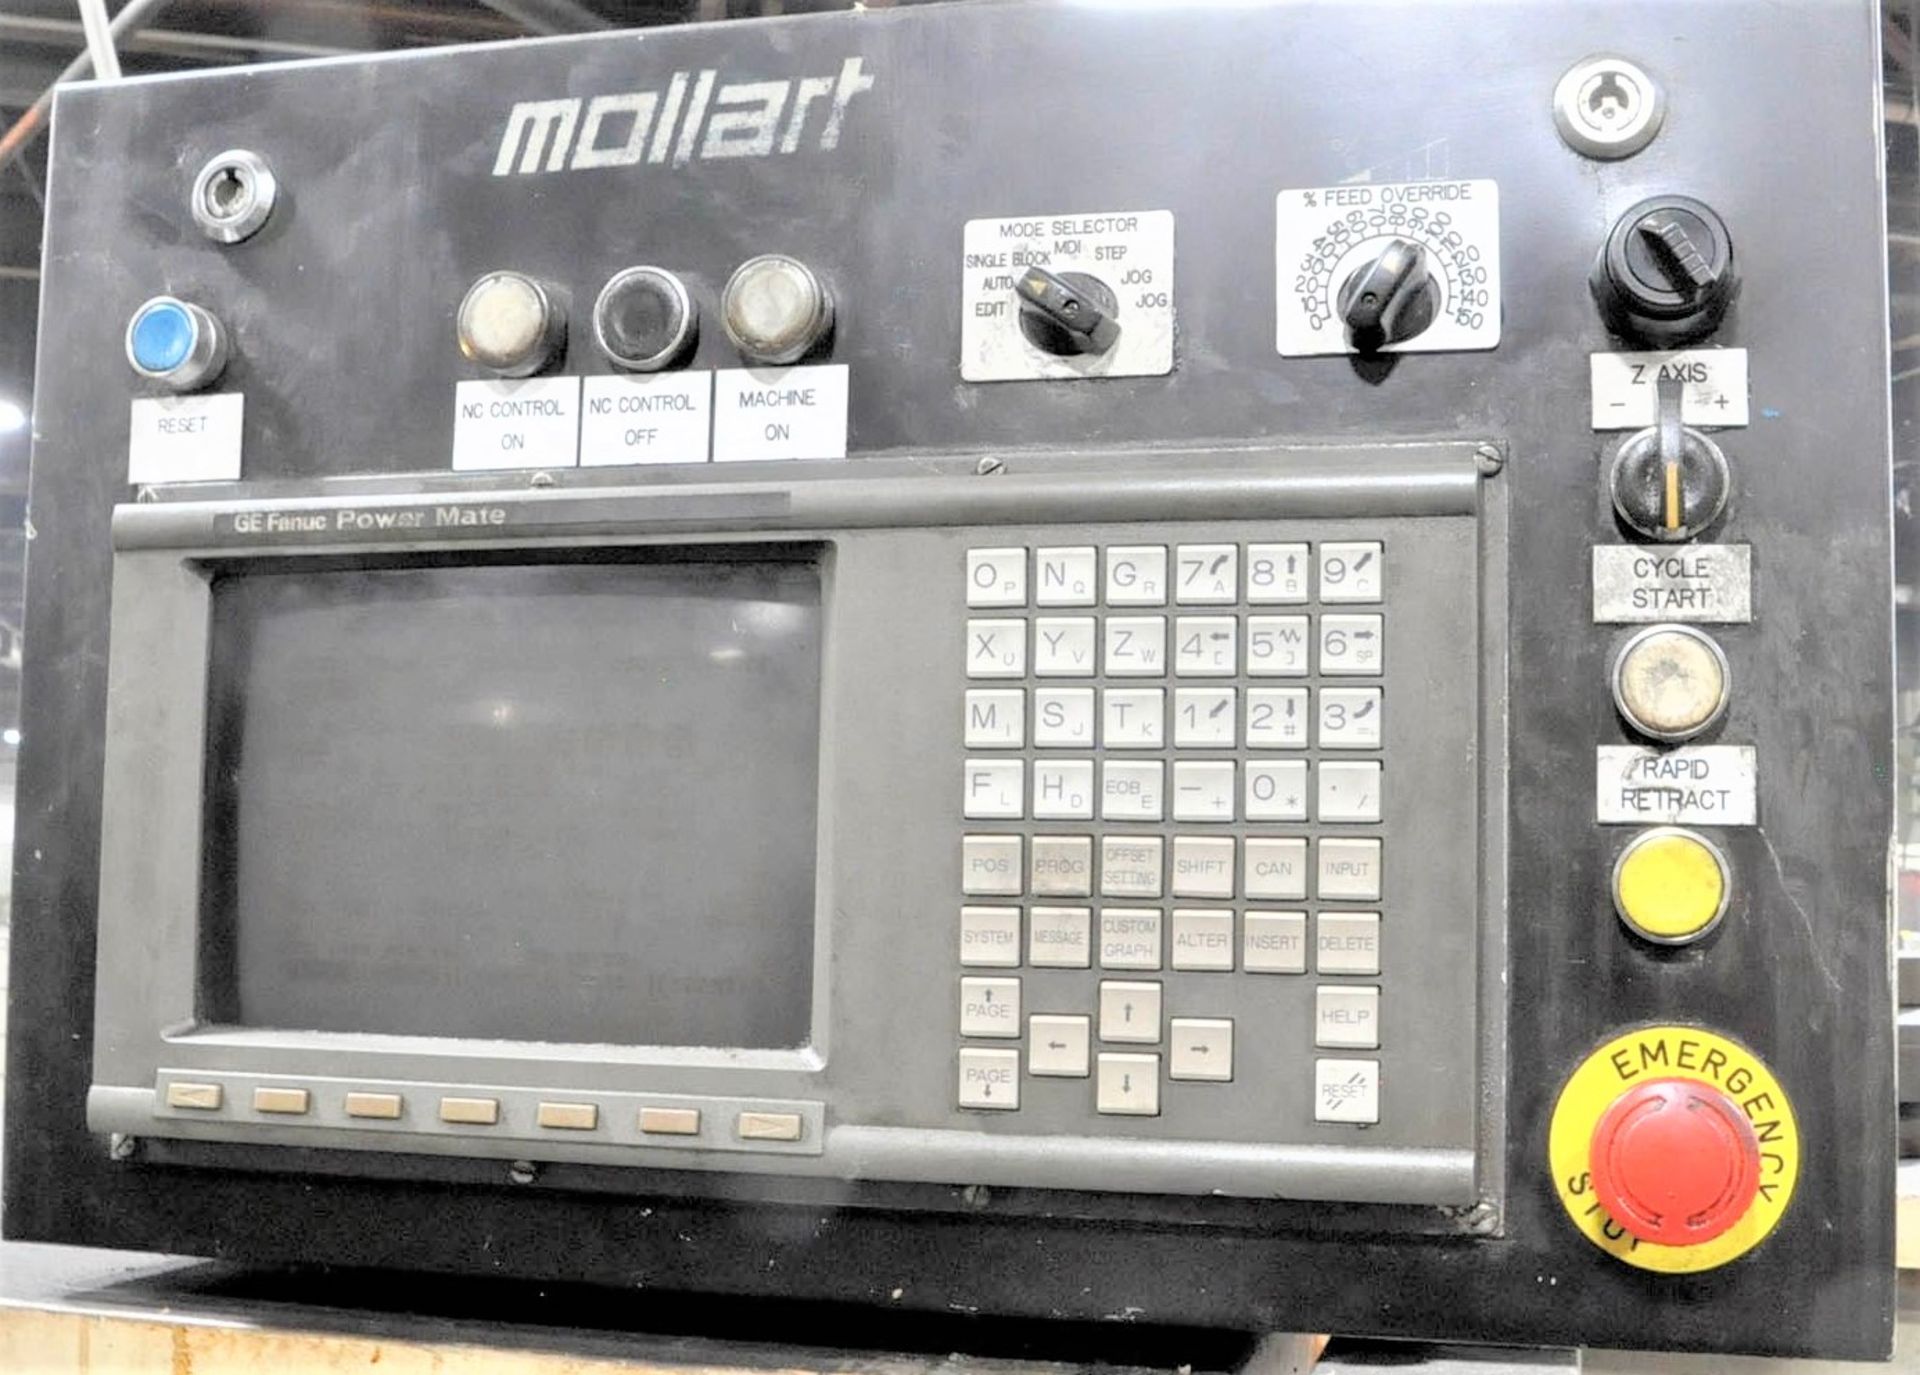 1/2" x 20" Mollart Twin Spindle CNC Gun Drill, S/N A444-0700, New 2000 - Image 3 of 5